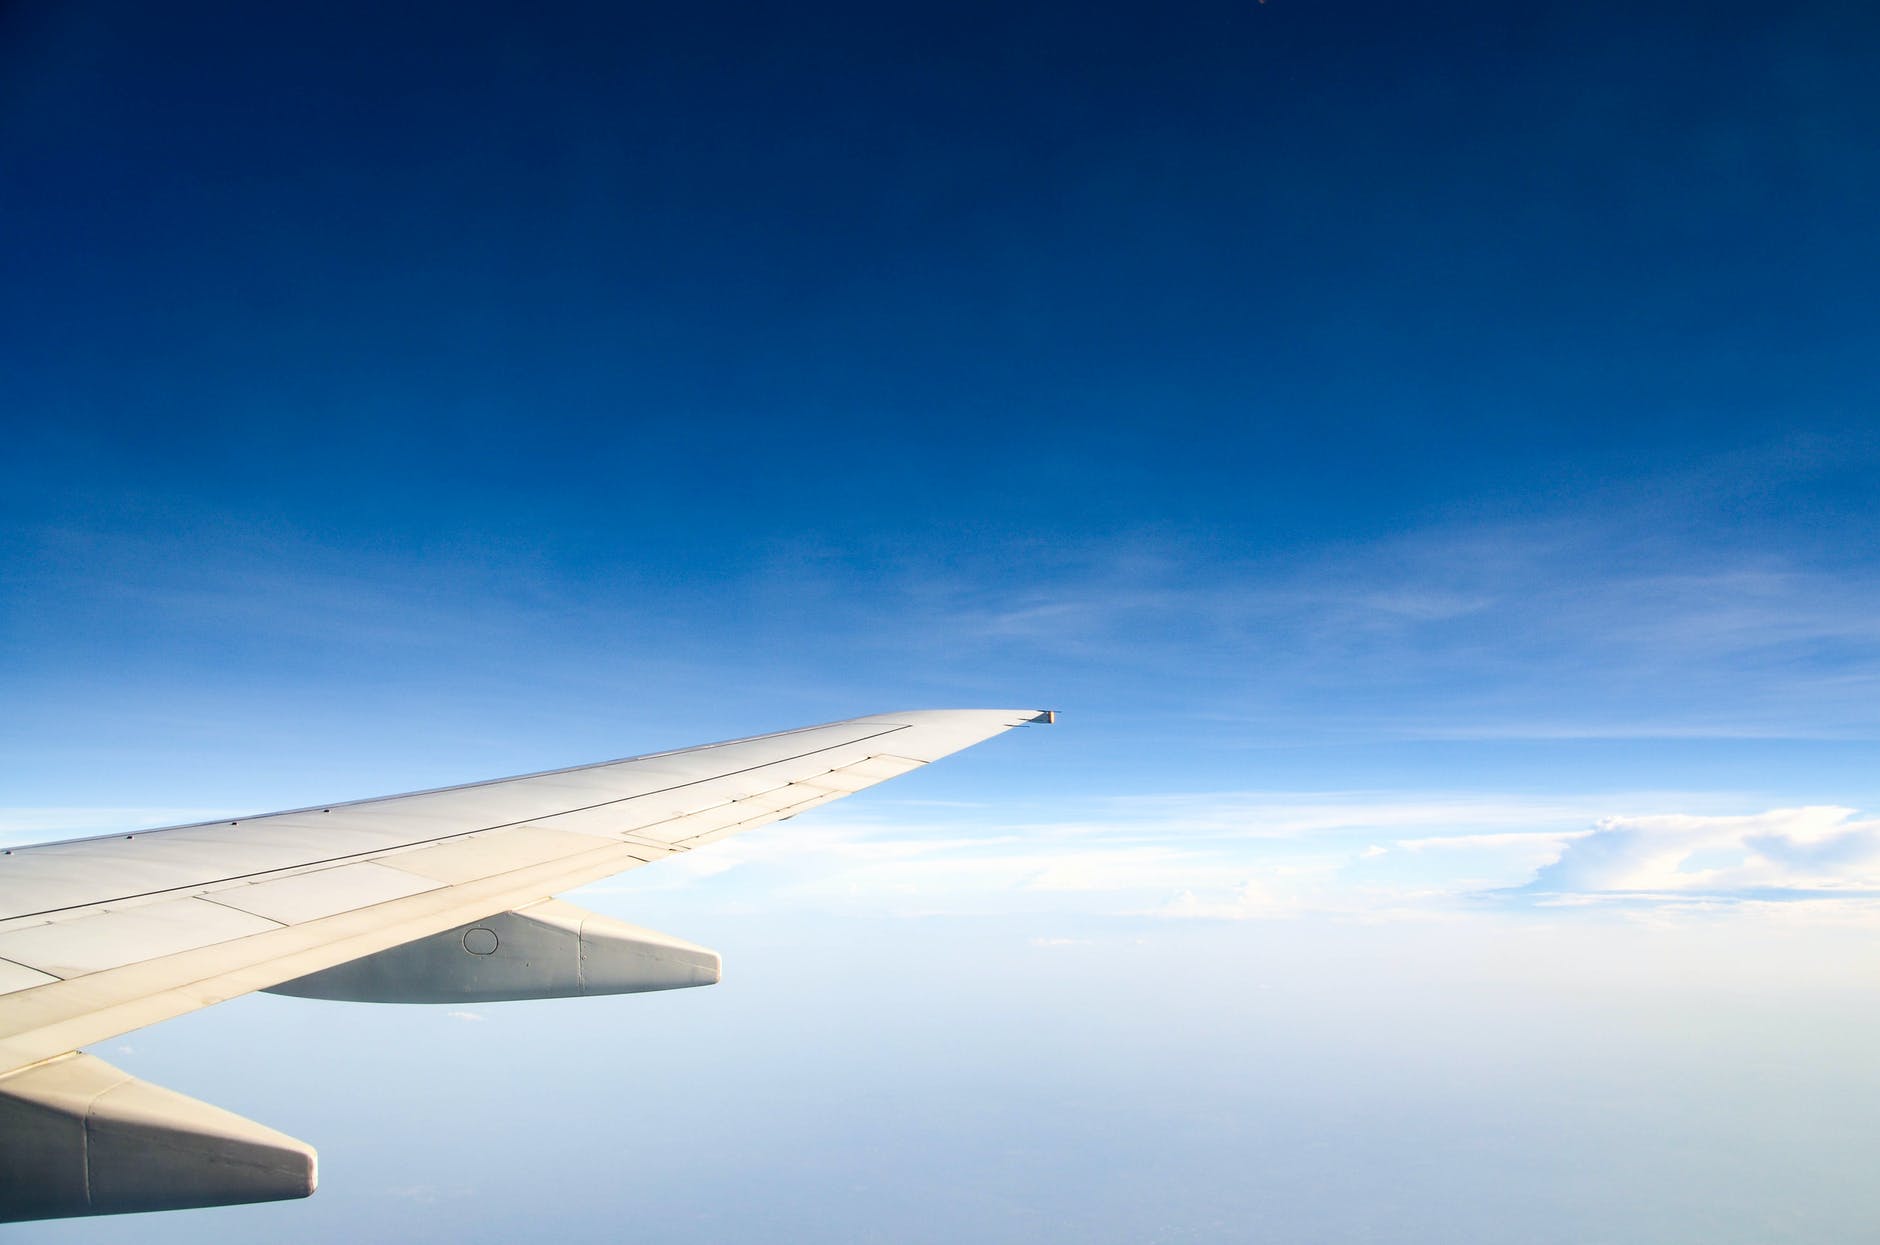 photography of aircraft wing